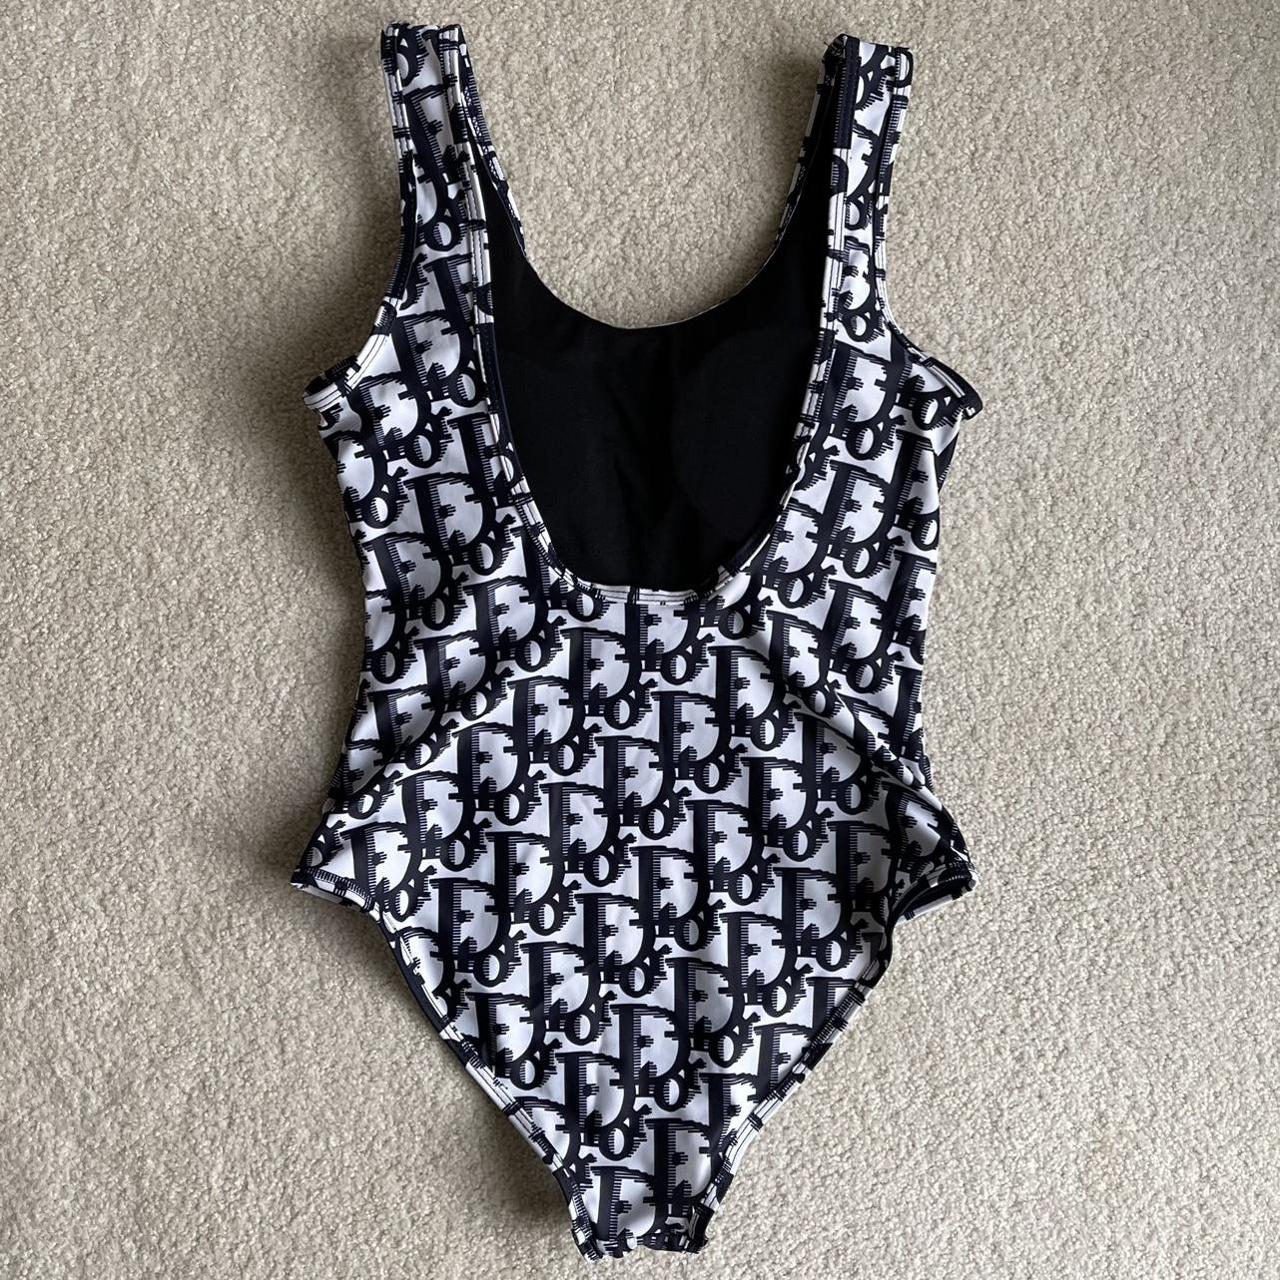 Christian Dior Women's Black and White Swimsuit-one-piece | Depop